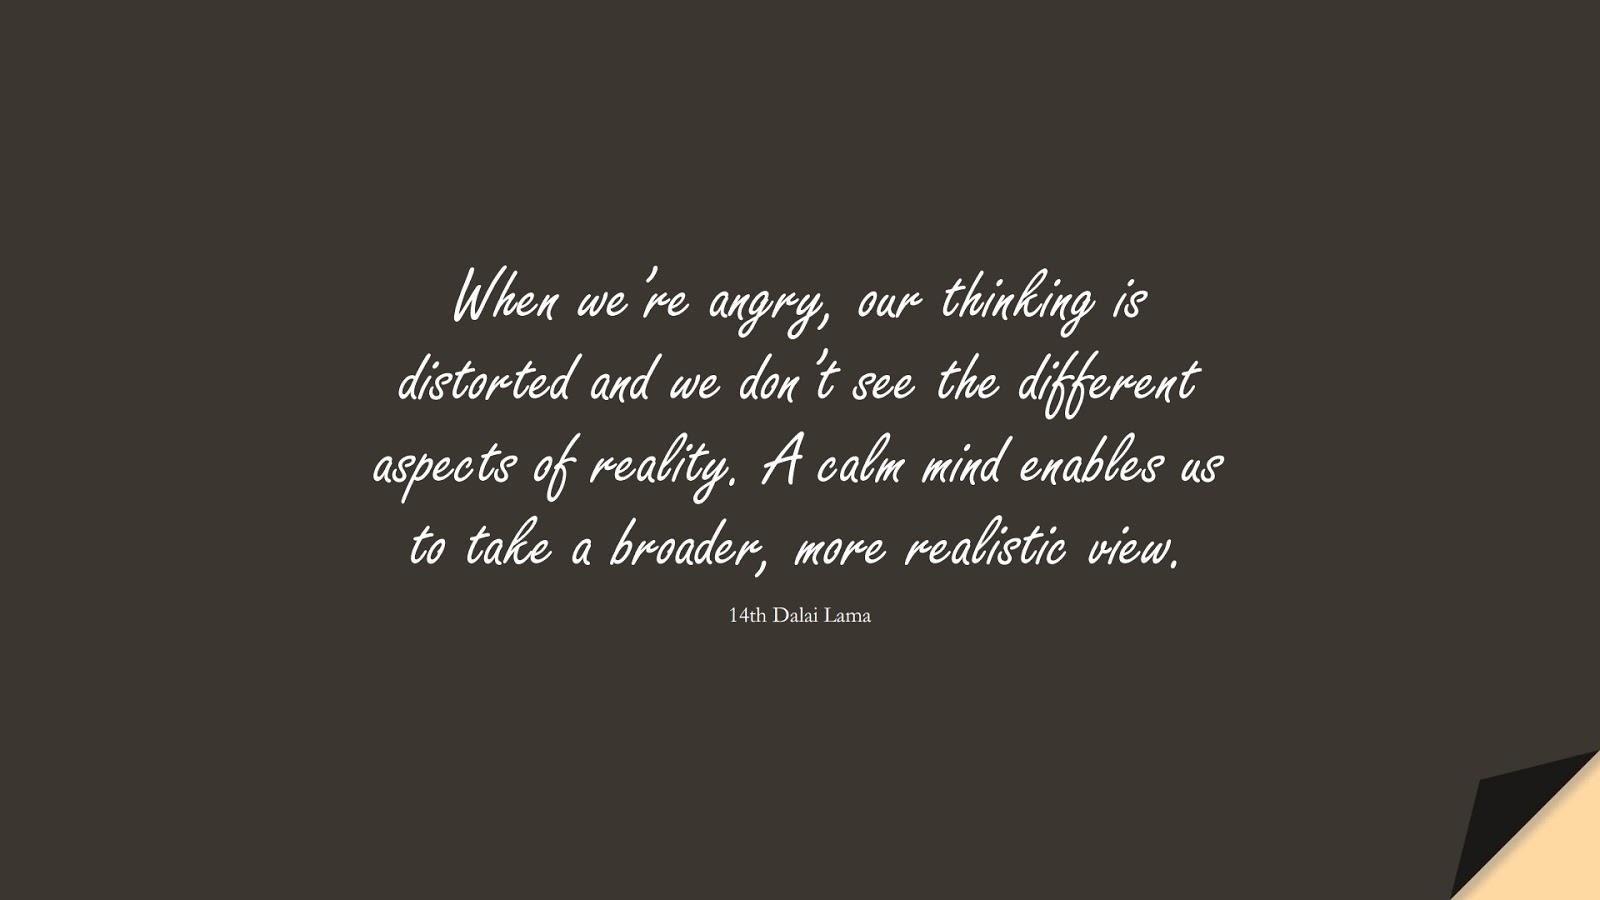 When we’re angry, our thinking is distorted and we don’t see the different aspects of reality. A calm mind enables us to take a broader, more realistic view. (14th Dalai Lama);  #CalmQuotes